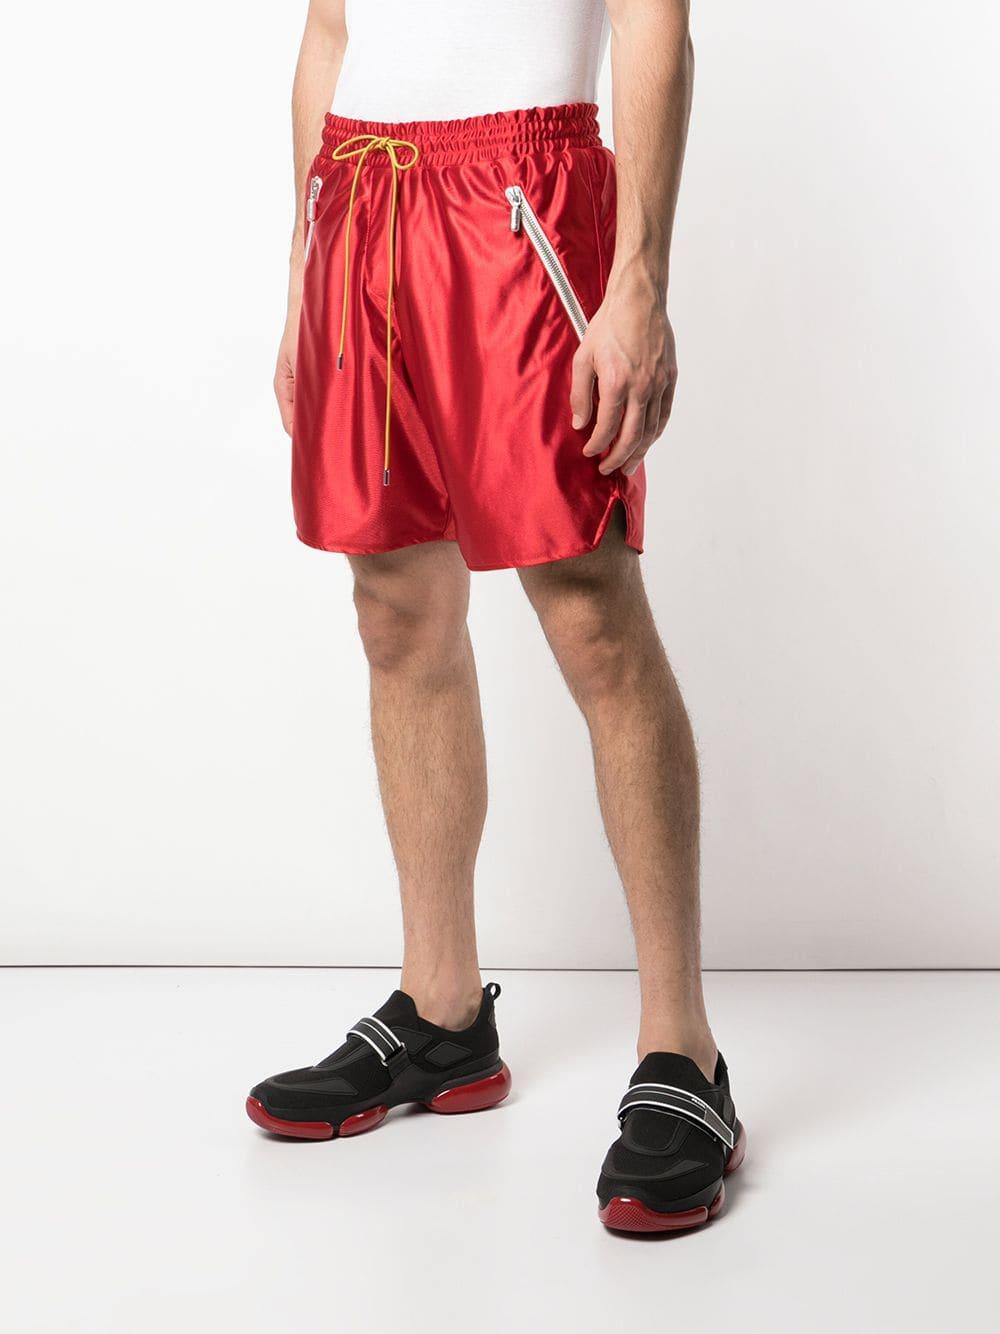 Rhude Cotton Pe Shorts in Red for Men - Lyst